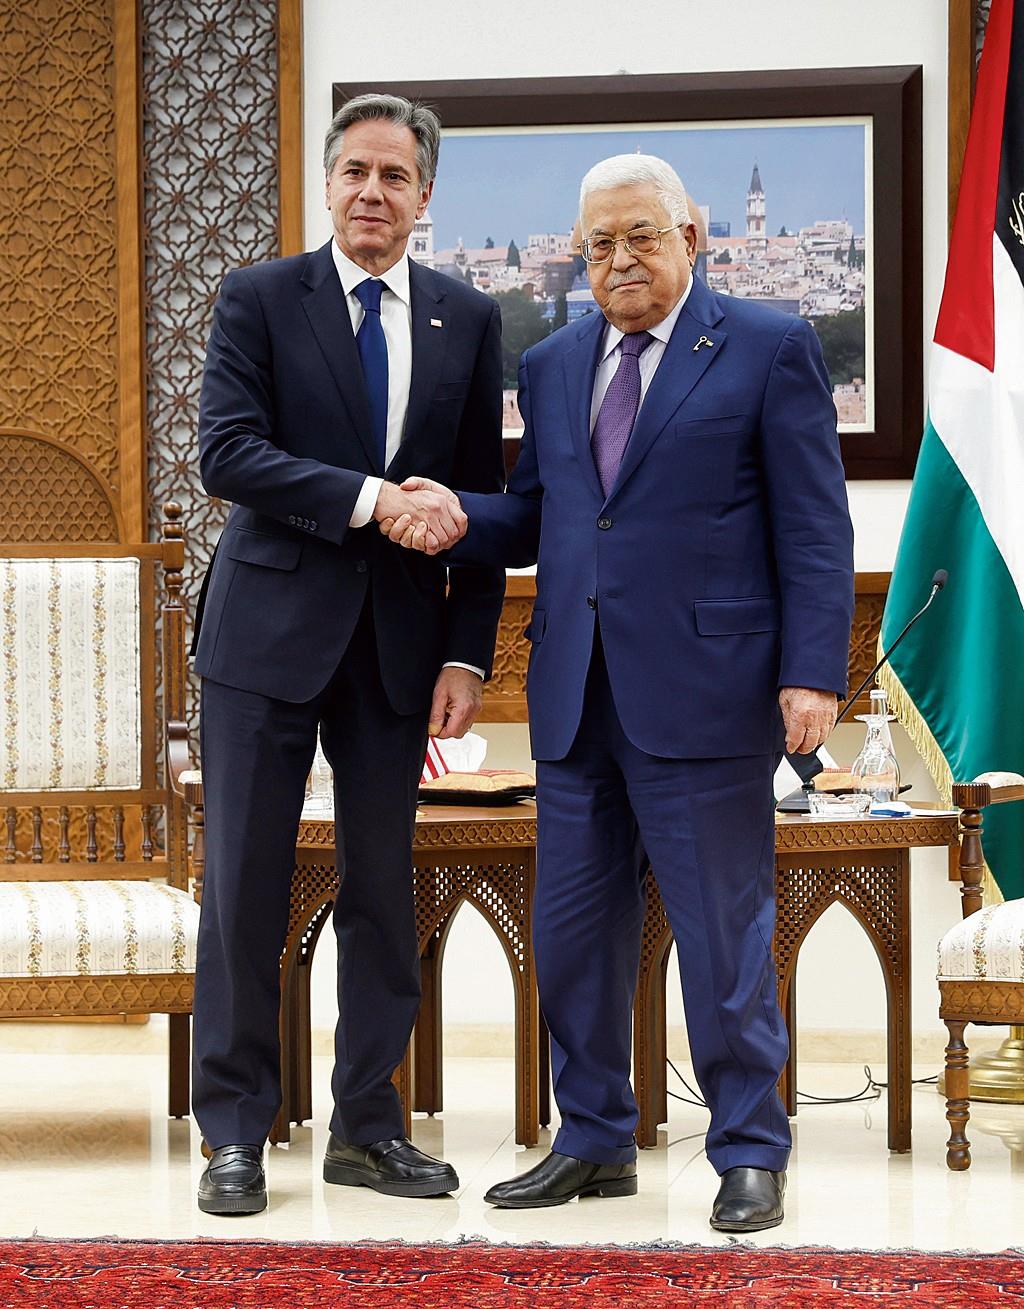 At meeting with Antony Blinken, Palestinian Authority President Mahmoud Abbas presses for immediate ceasefire